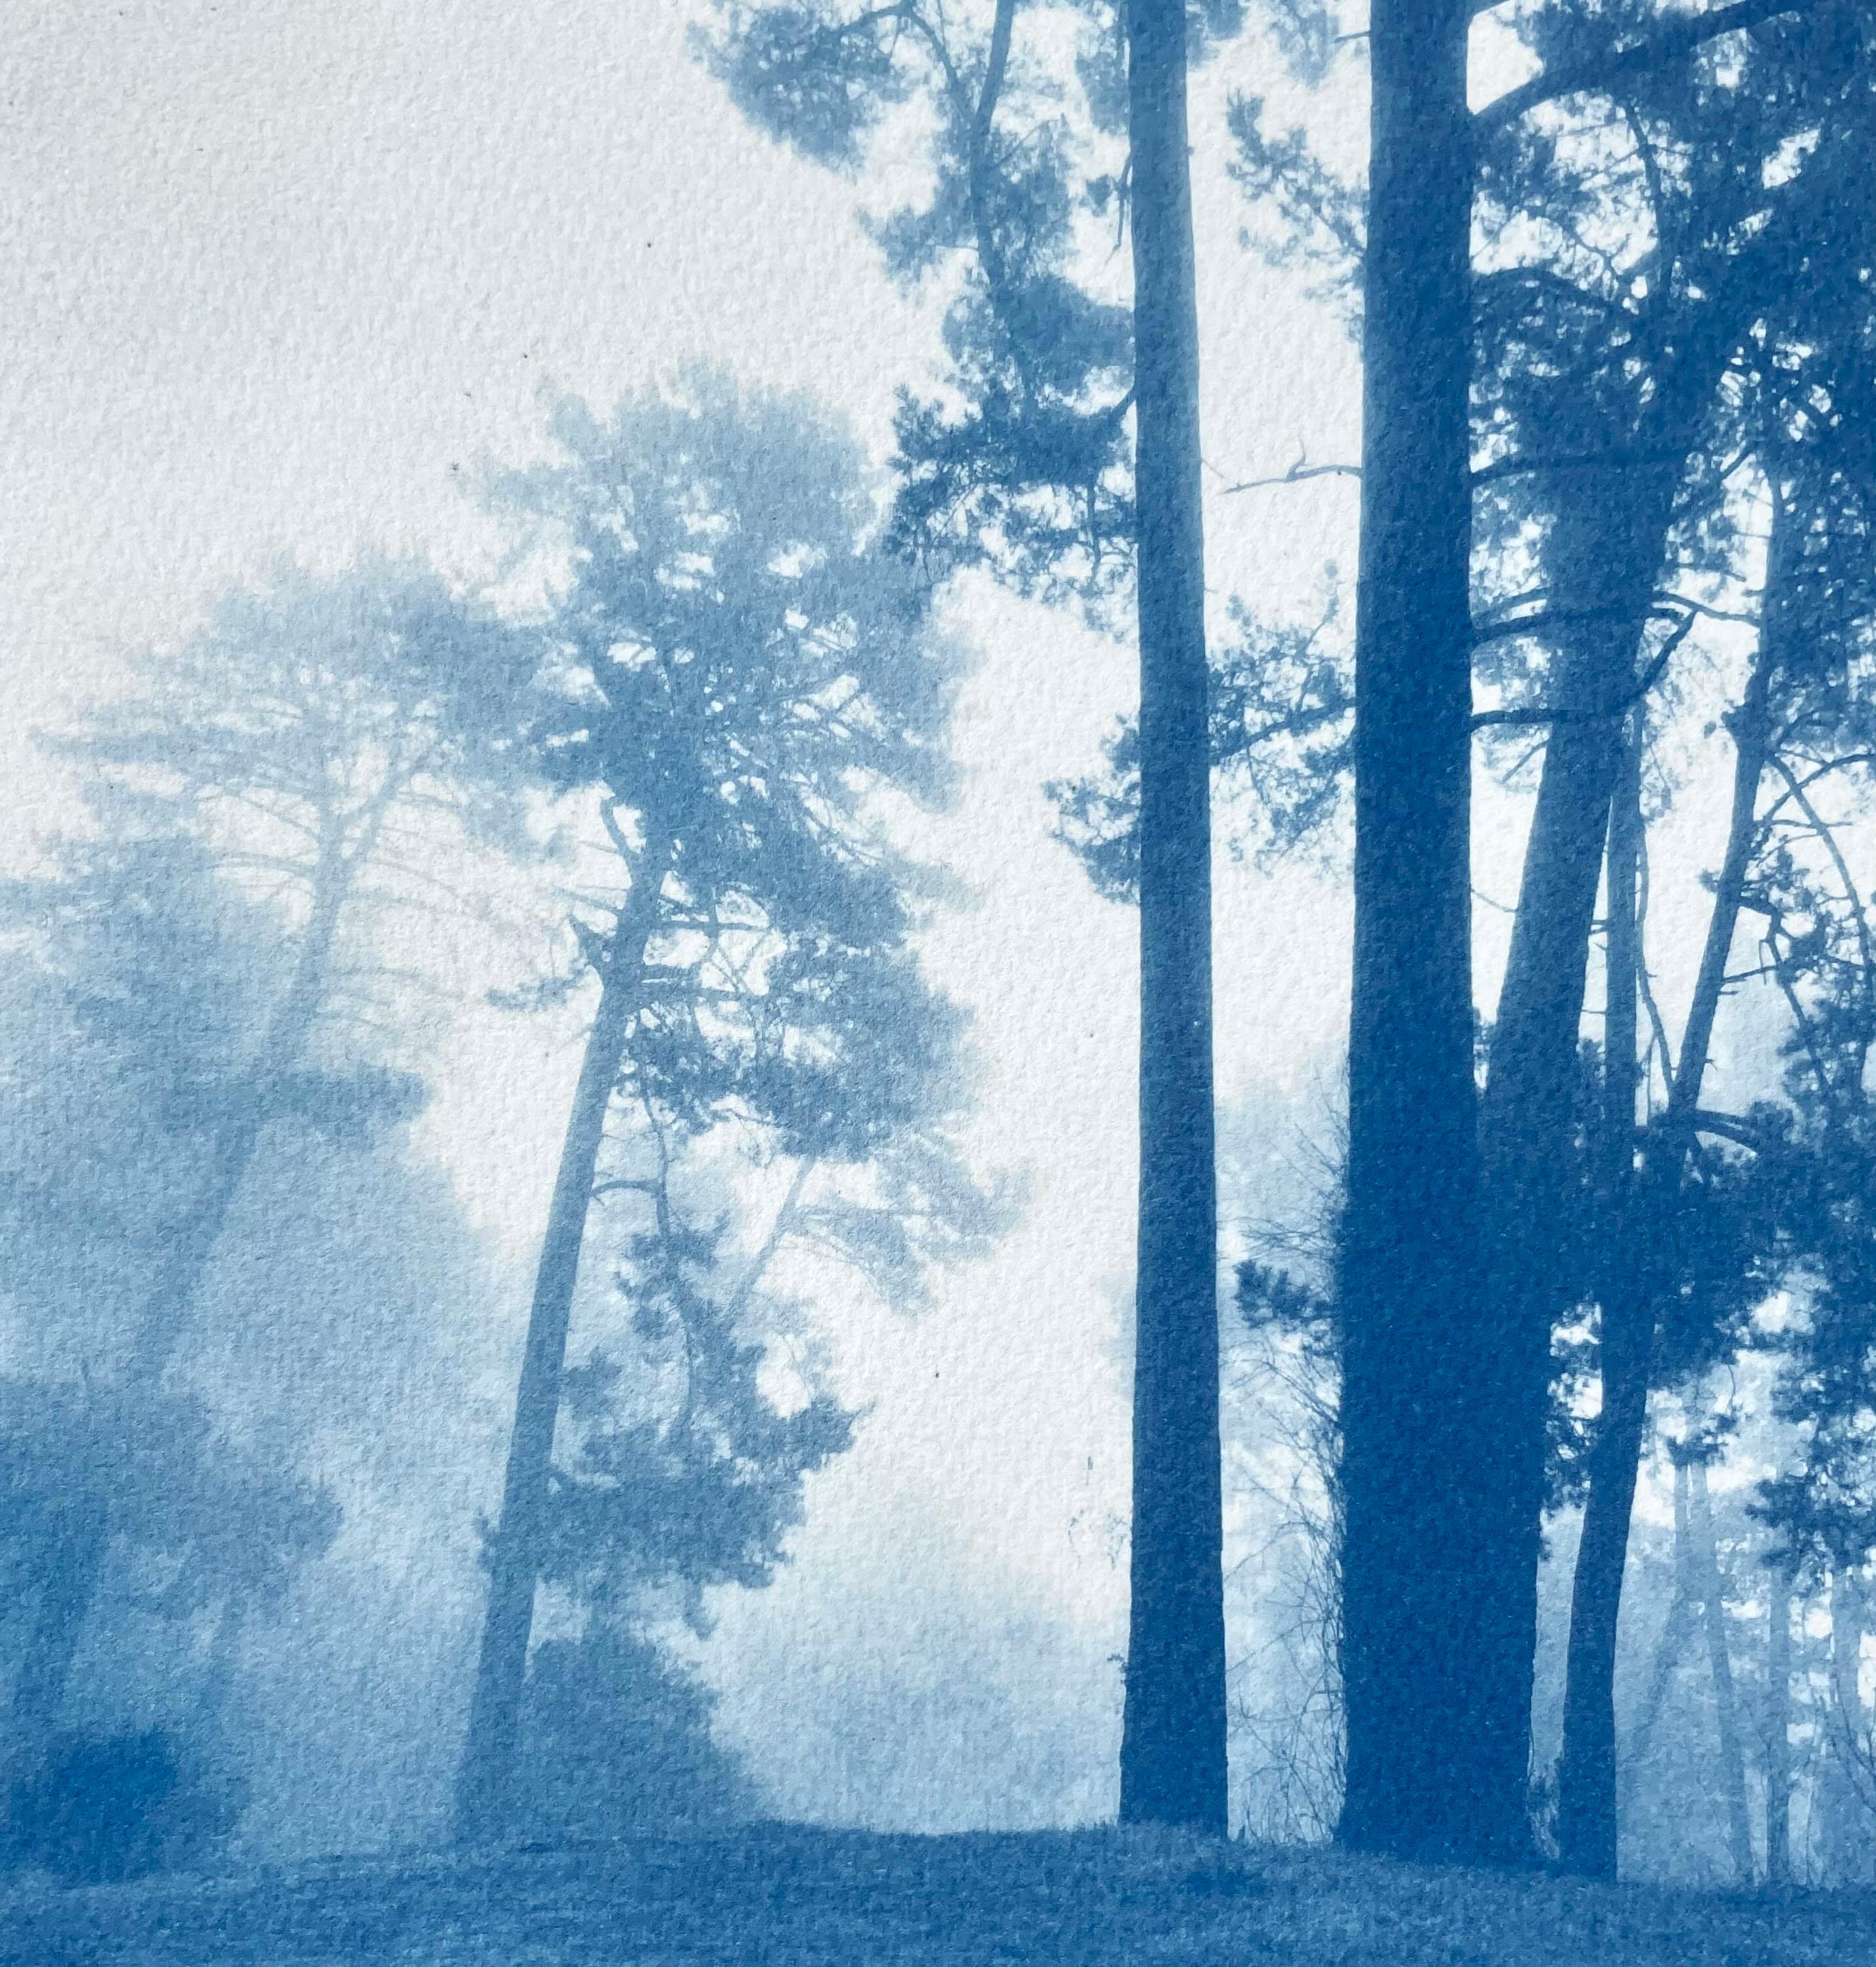 Morning Valley Light (Hand-printed cyanotype, 18 x 24 inches) - Realist Print by Christine So